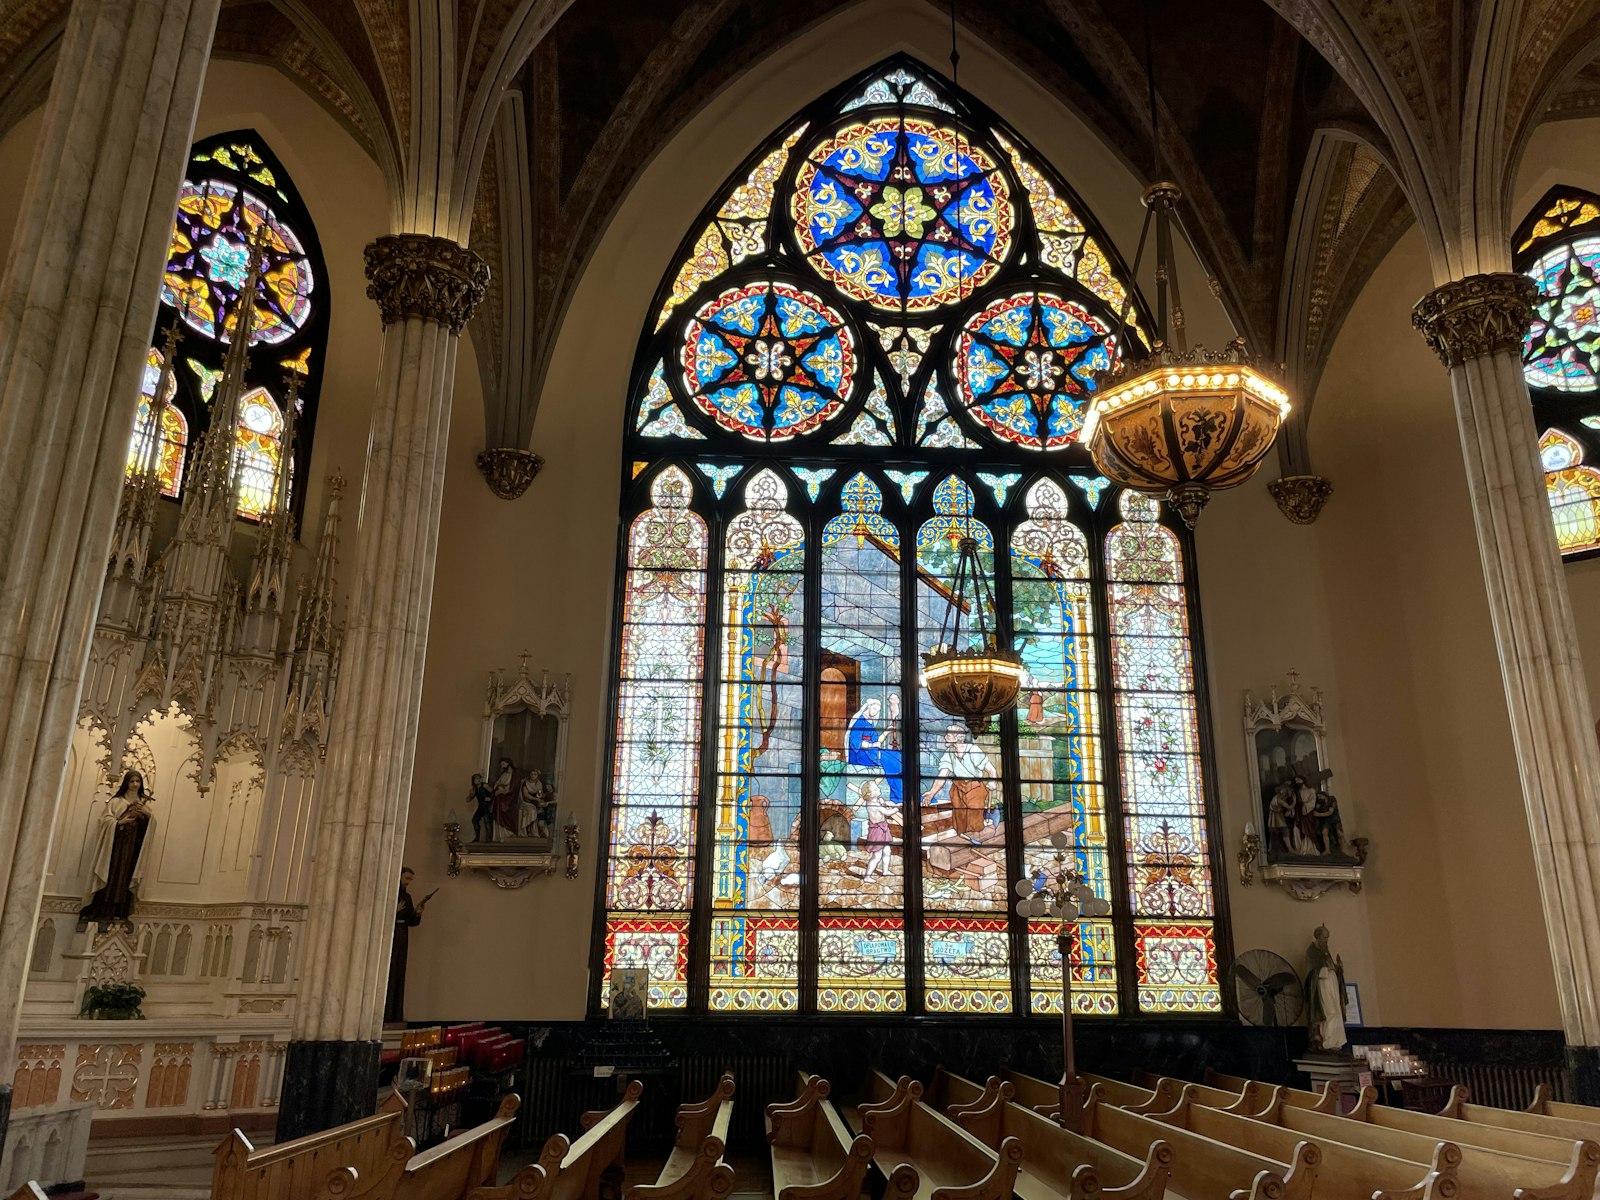 The story took on a whole new direction and found its momentum as Faime, and his team explored each church and discovered stories that they had not anticipated. One example is the film’s exploration of stained glass.